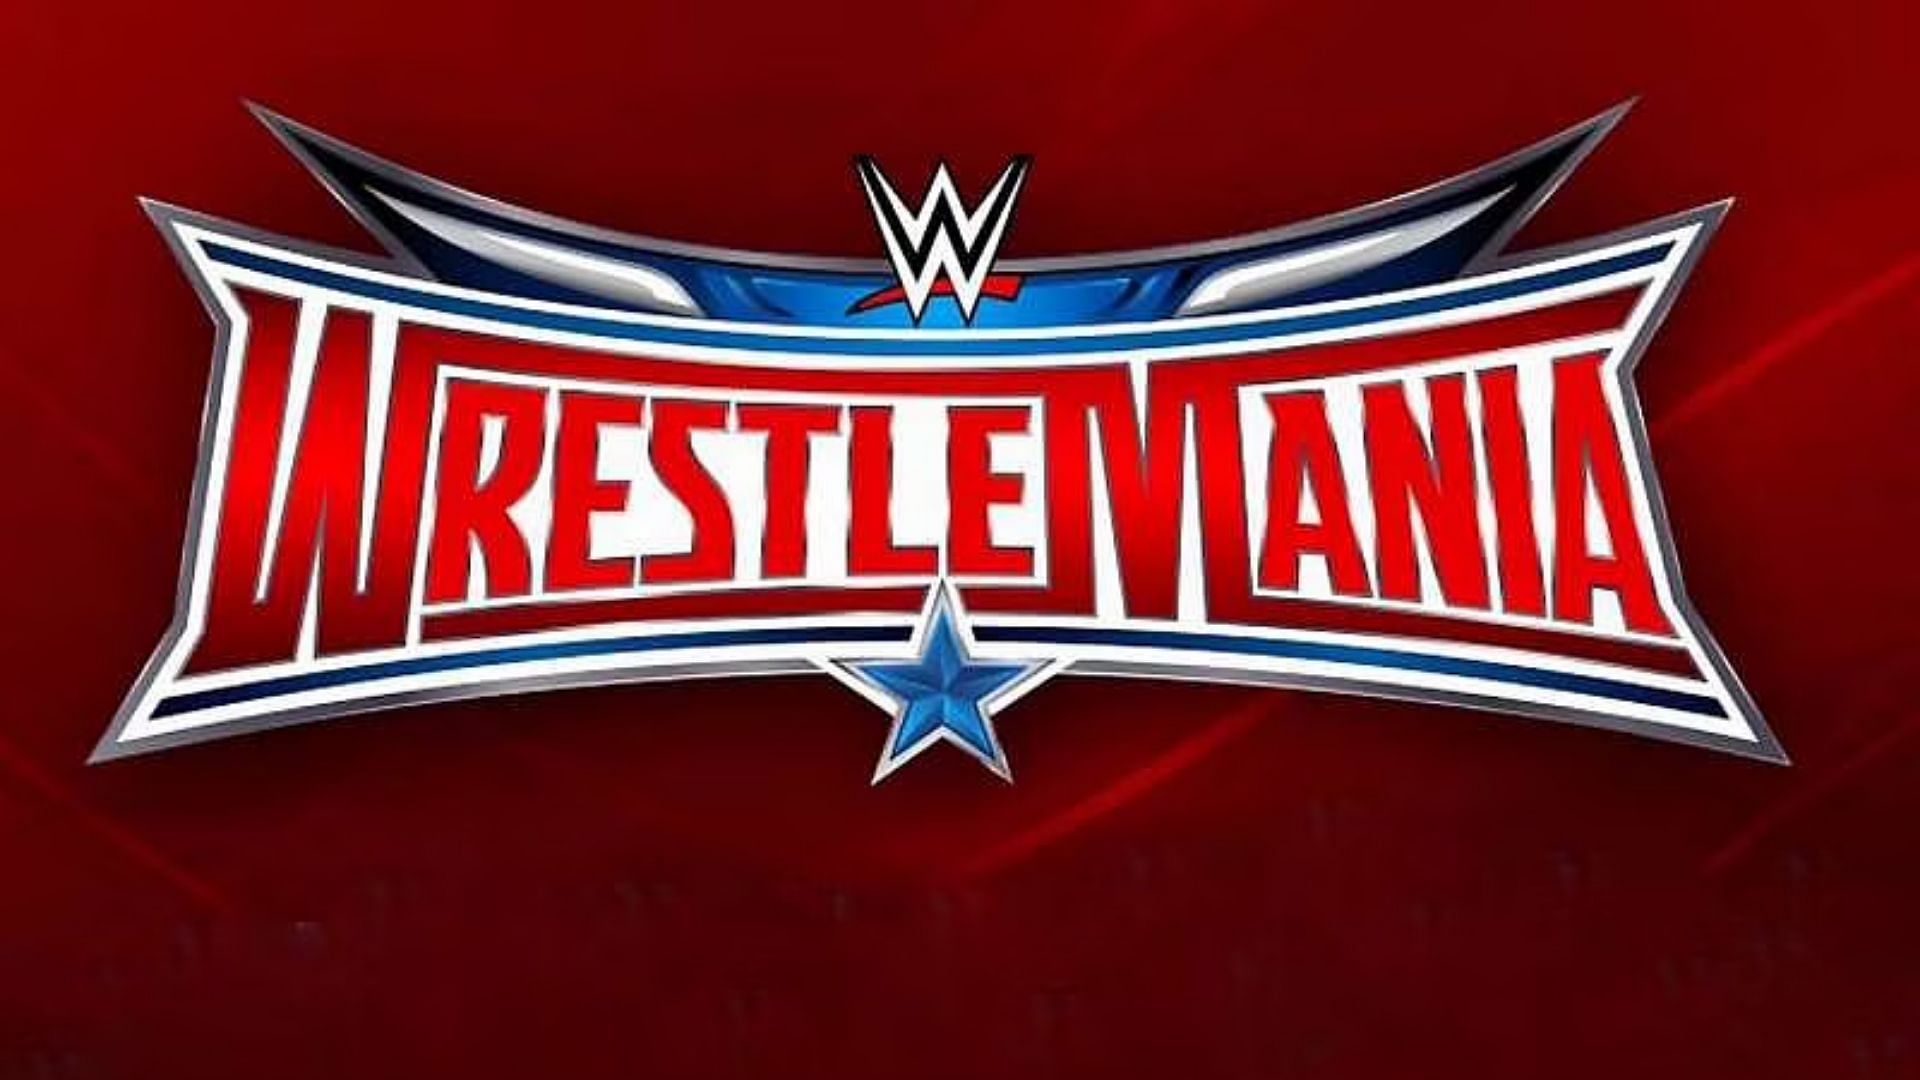 WrestleMania 32, the greatest WrestleMania in the history of WWE?